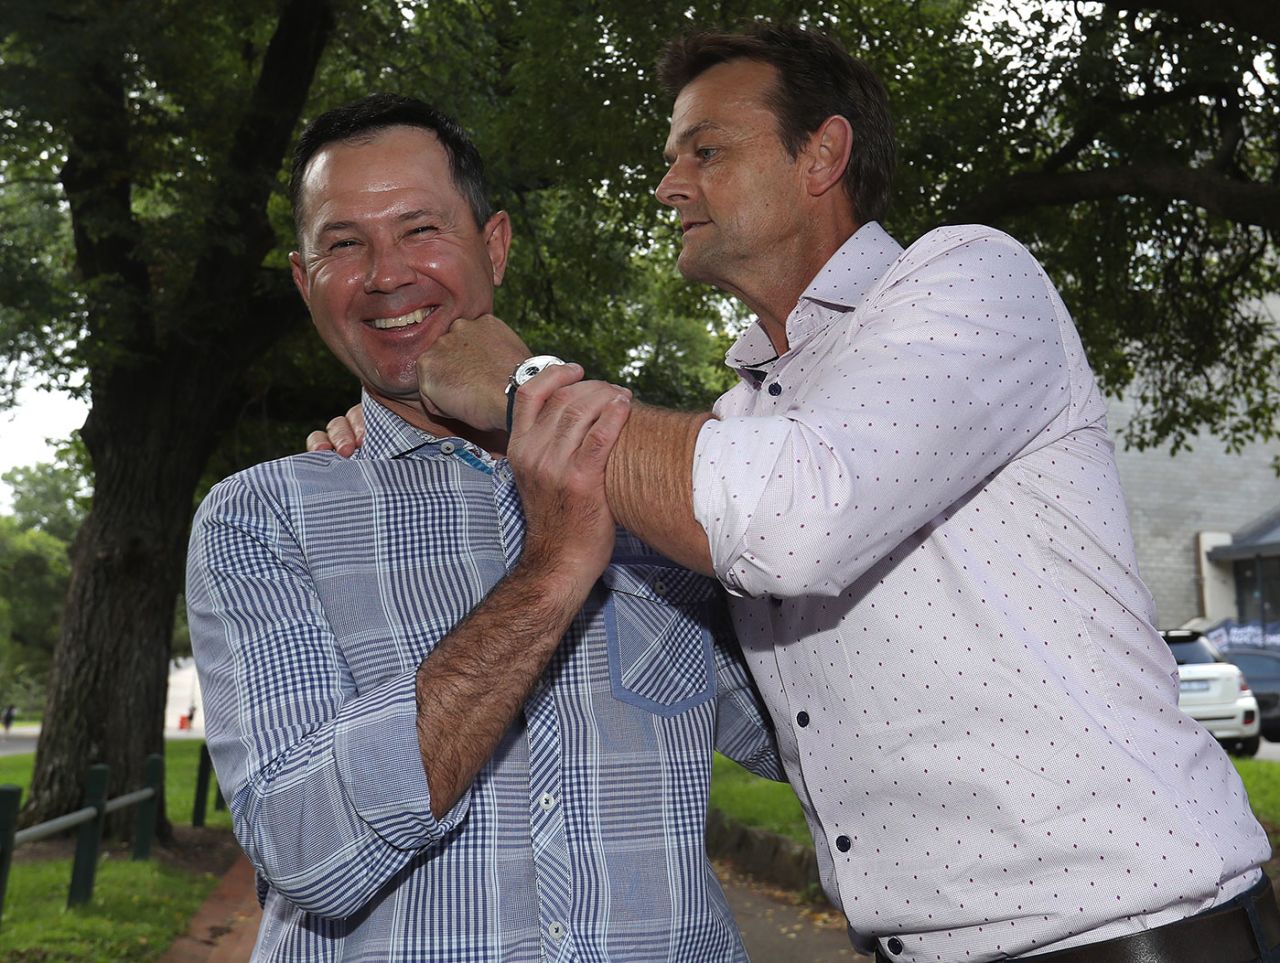 Ricky Ponting and Adam Gilchrist will captain the two teams in the Bushfire Bash, Melbourne, February 6, 2020